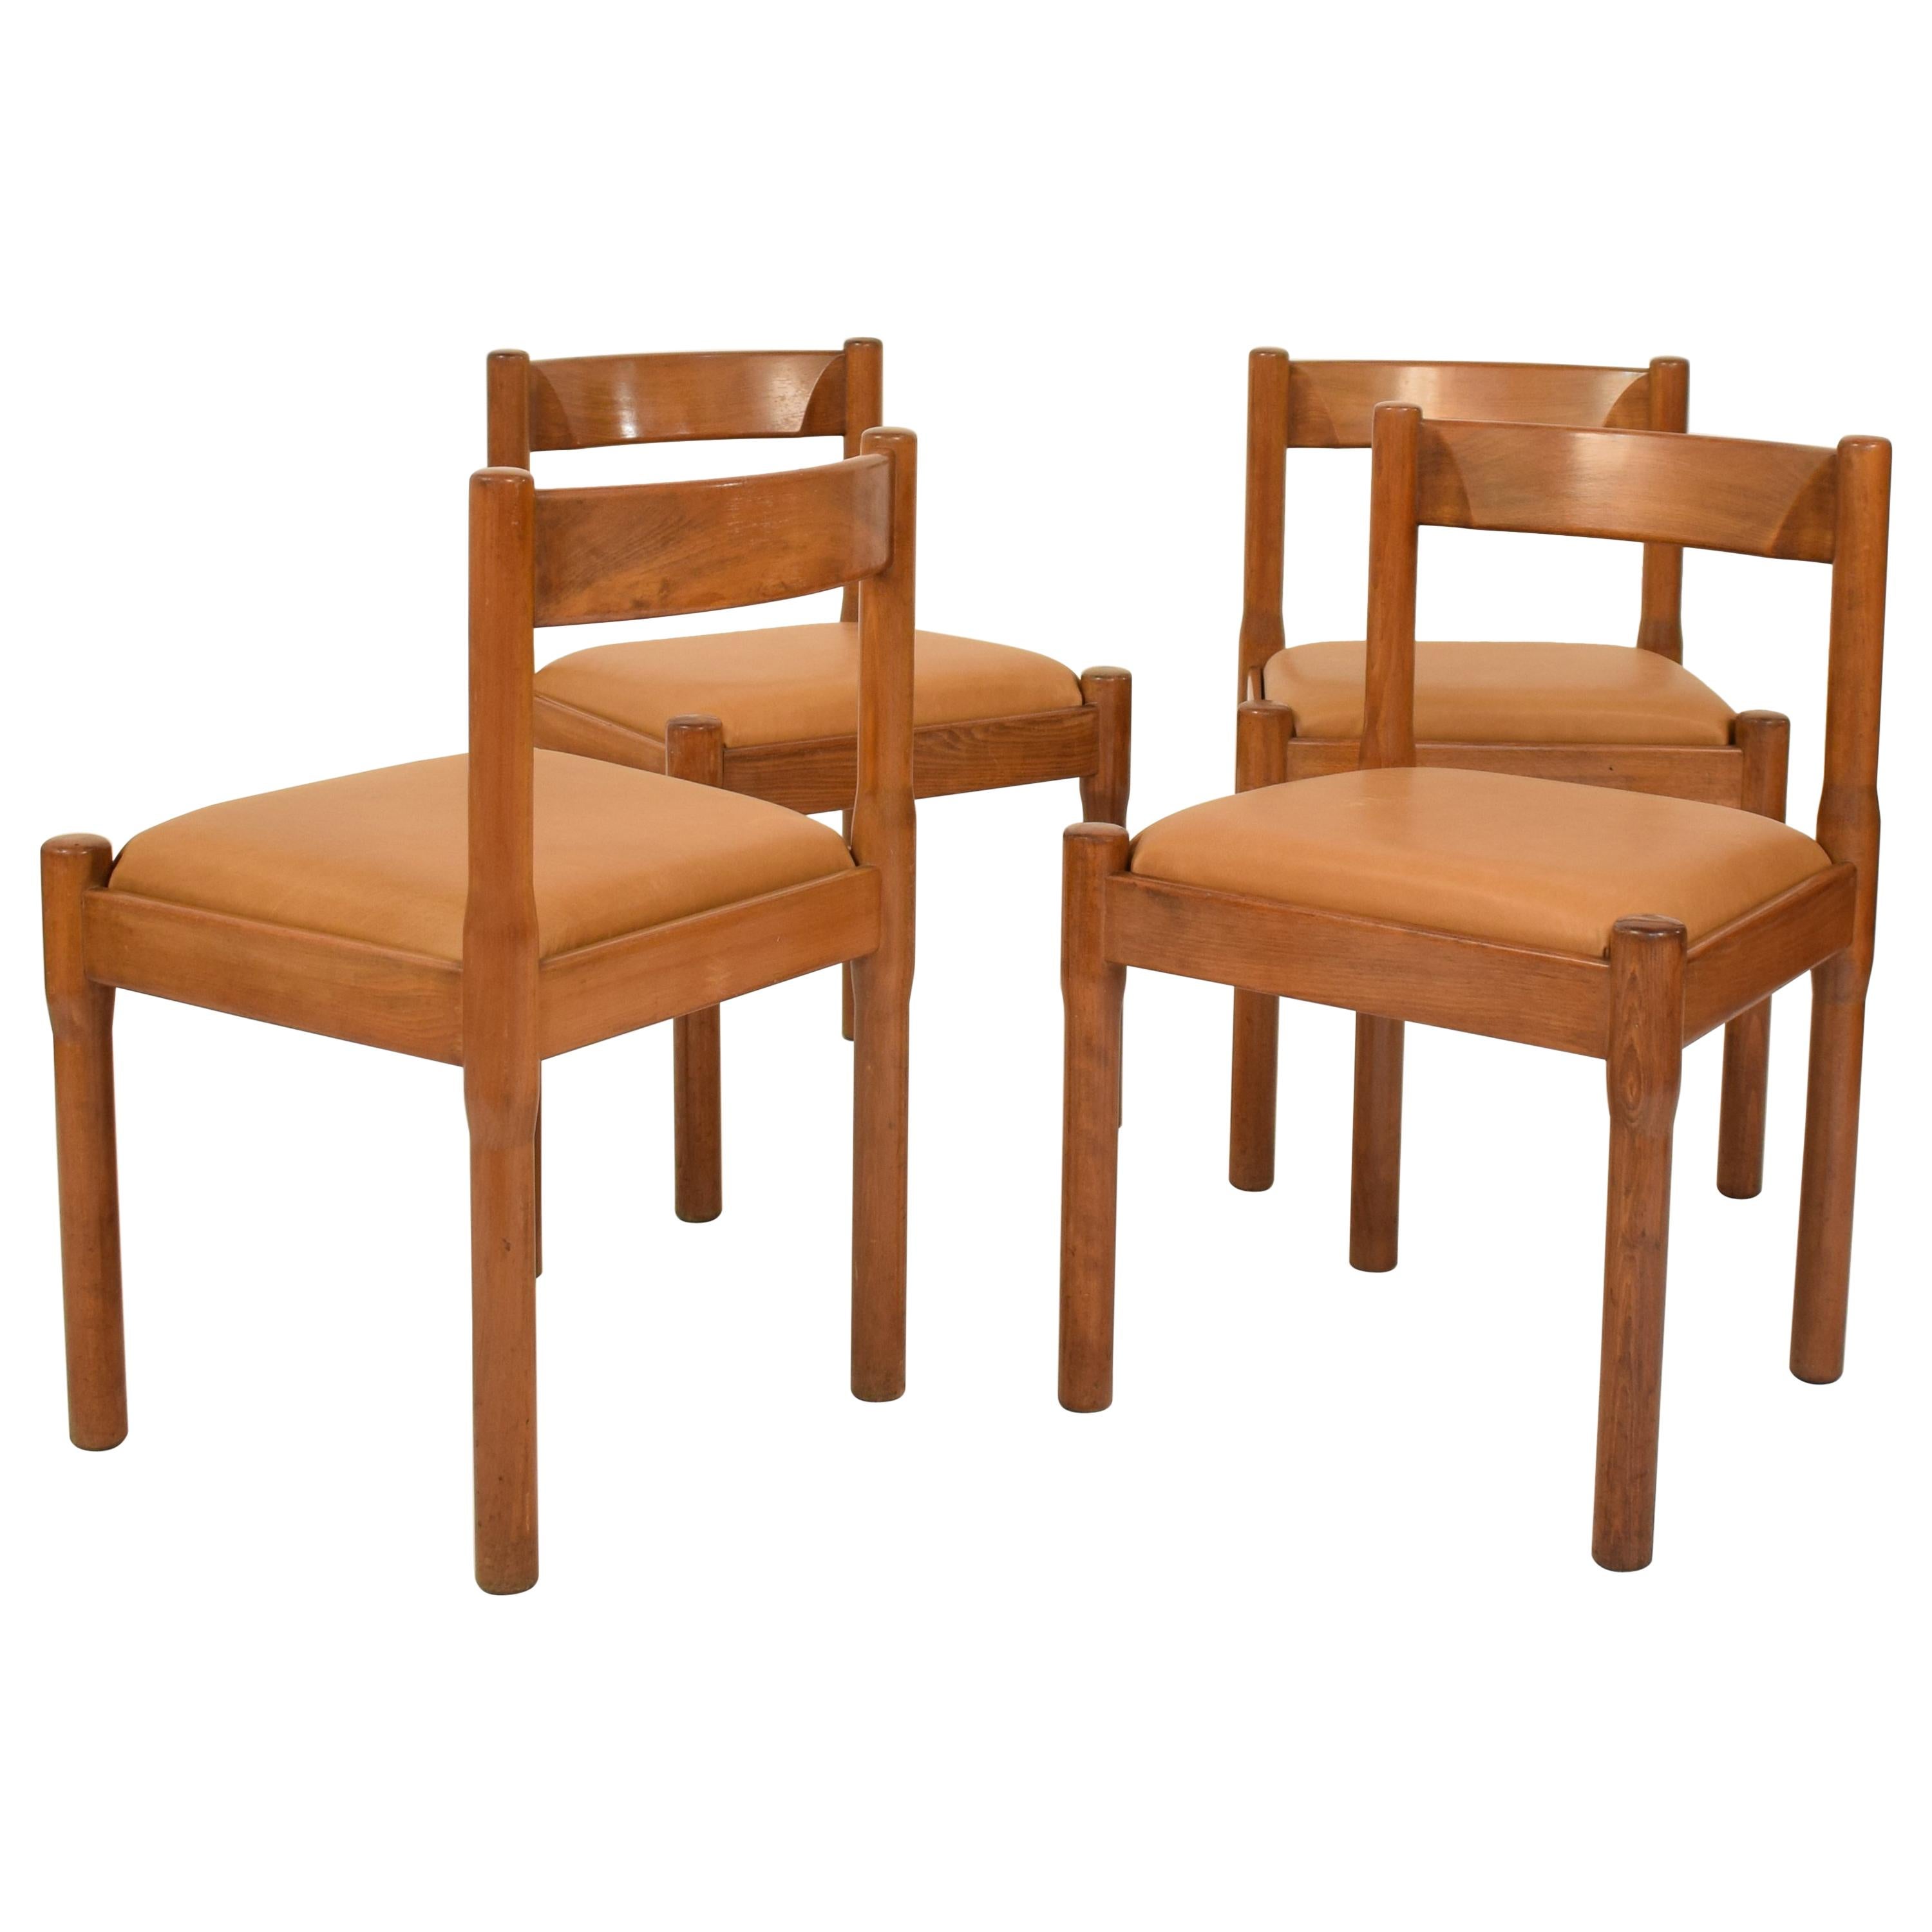 Set of Four Mid-Century Dining Chairs Carimate by Vico Magistretti for Cassina